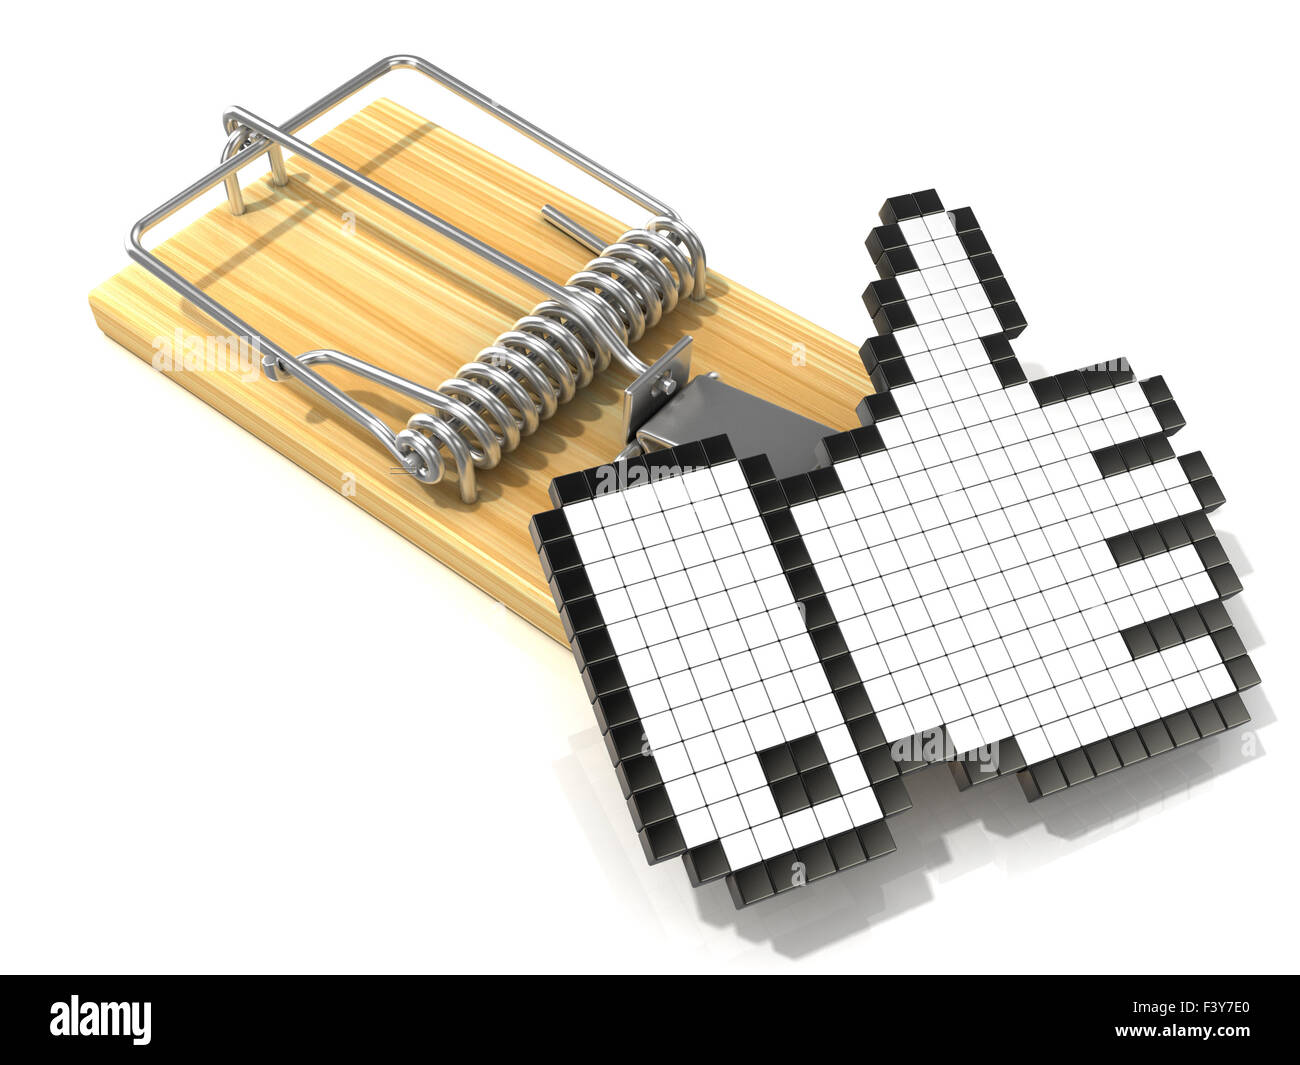 Like symbol in wooden mousetrap. 3D rendering illustration, isolated on white background. Stock Photo